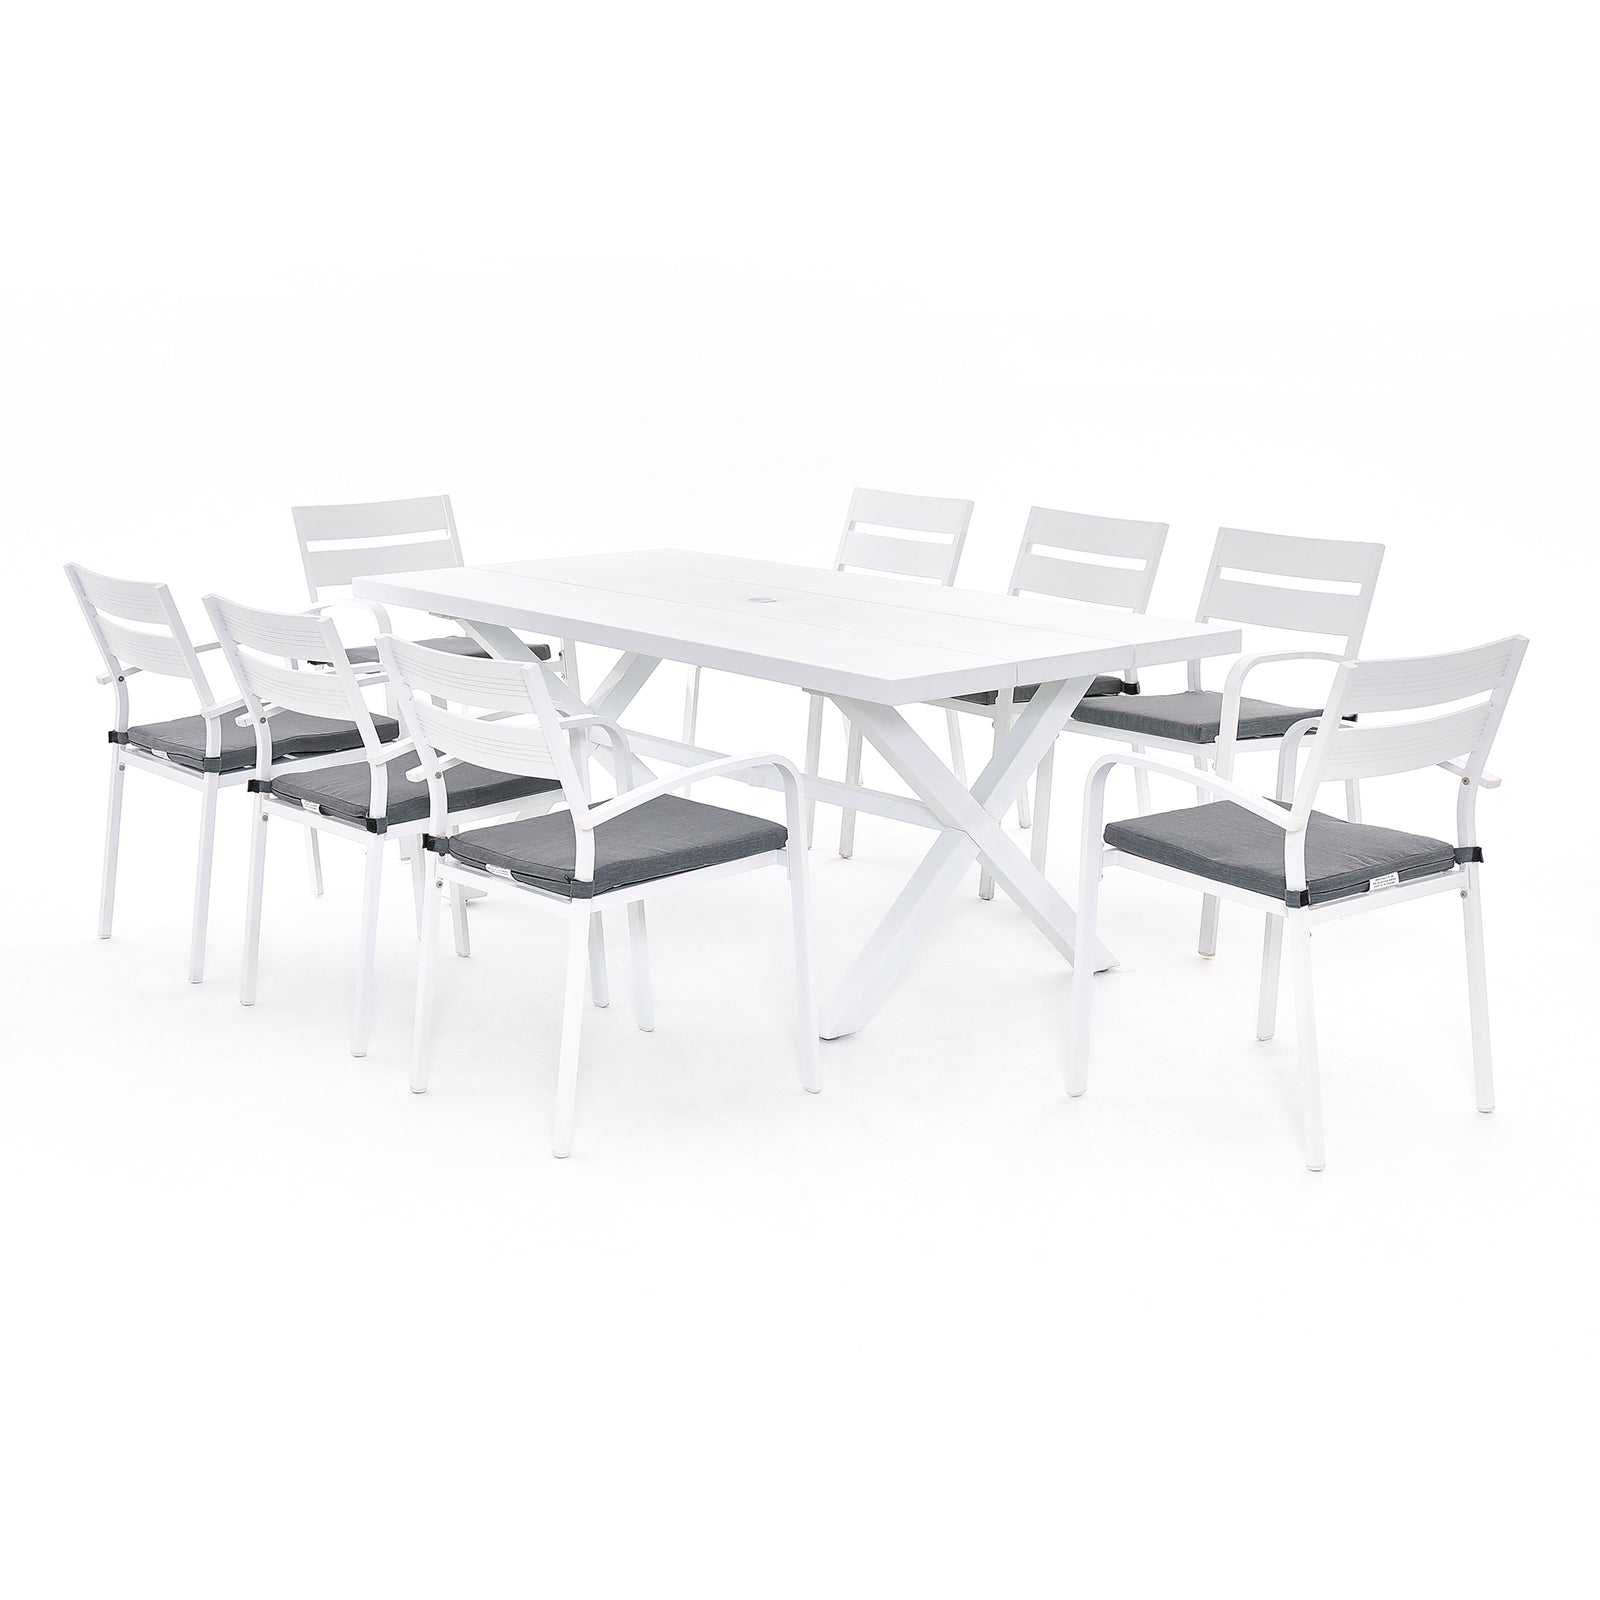 Salina Modern Aluminum Outdoor Furniture, White Aluminum Frame Outdoor Dining Set for 8, 8 dining chairs with cushions and X-Shaped Legs Design Dining Table#color_White